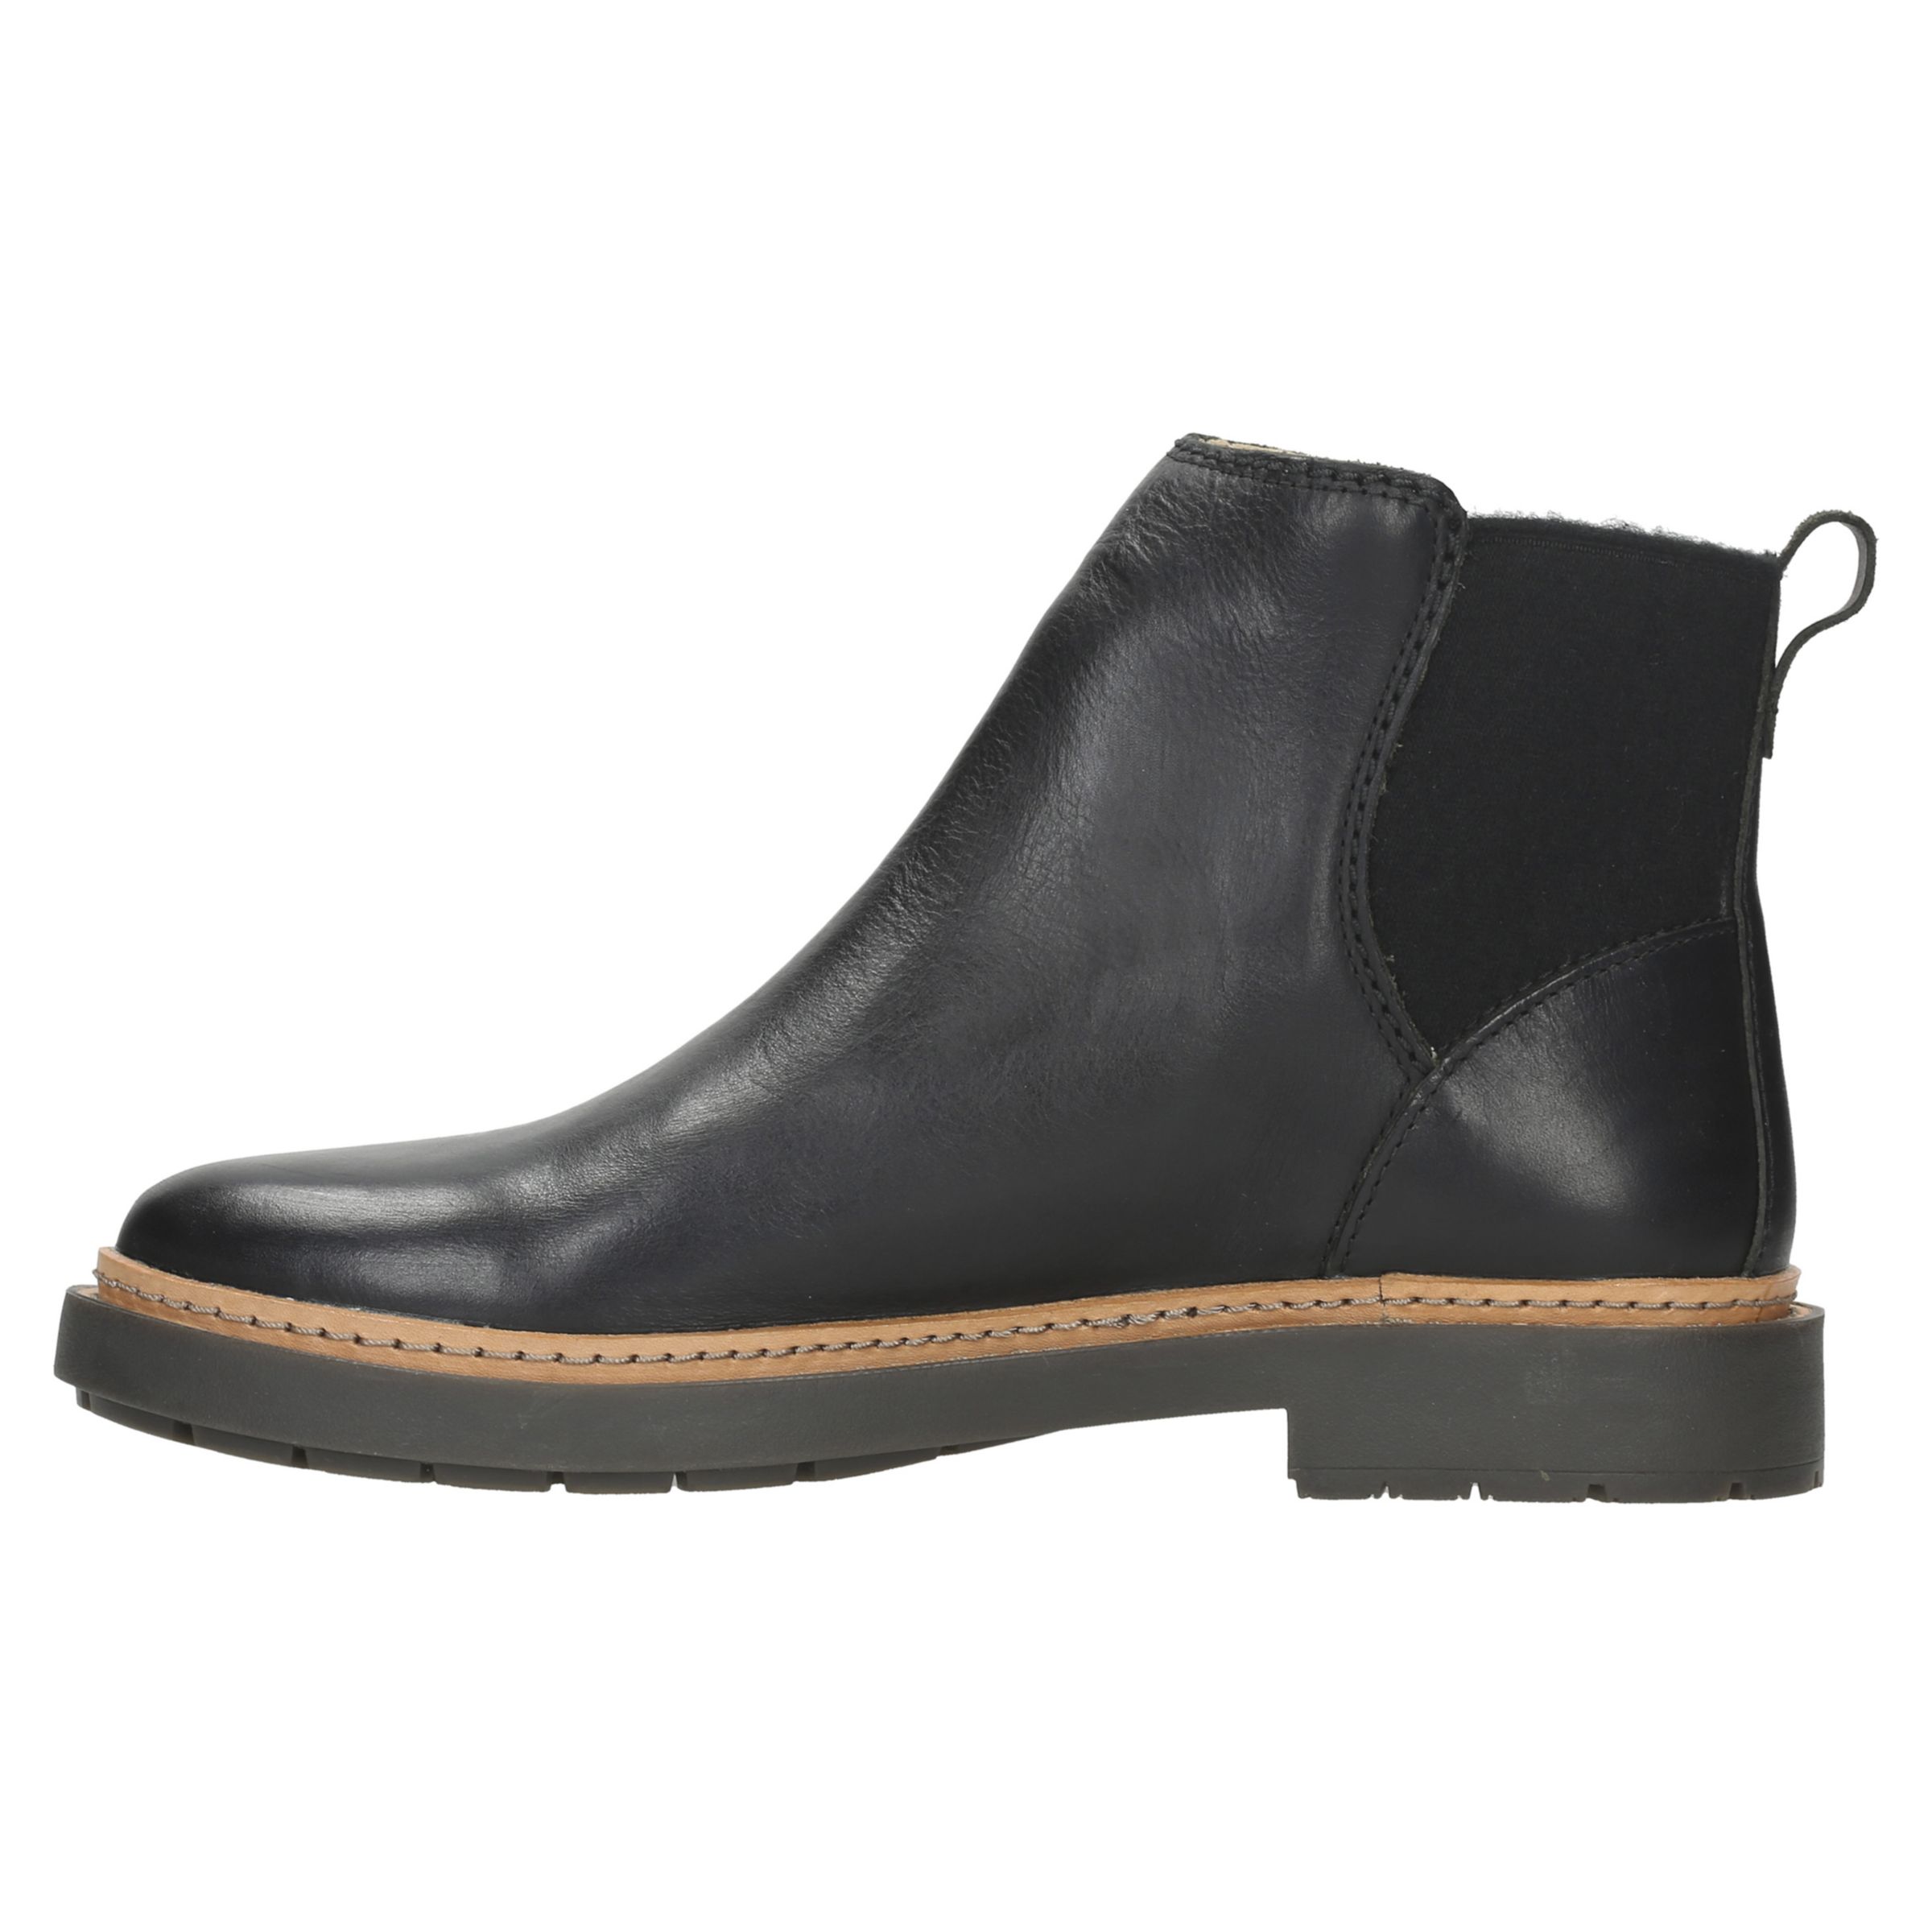 Ministerio Escéptico Betsy Trotwood Clarks Trace Fall Ankle Chelsea Boots, Black